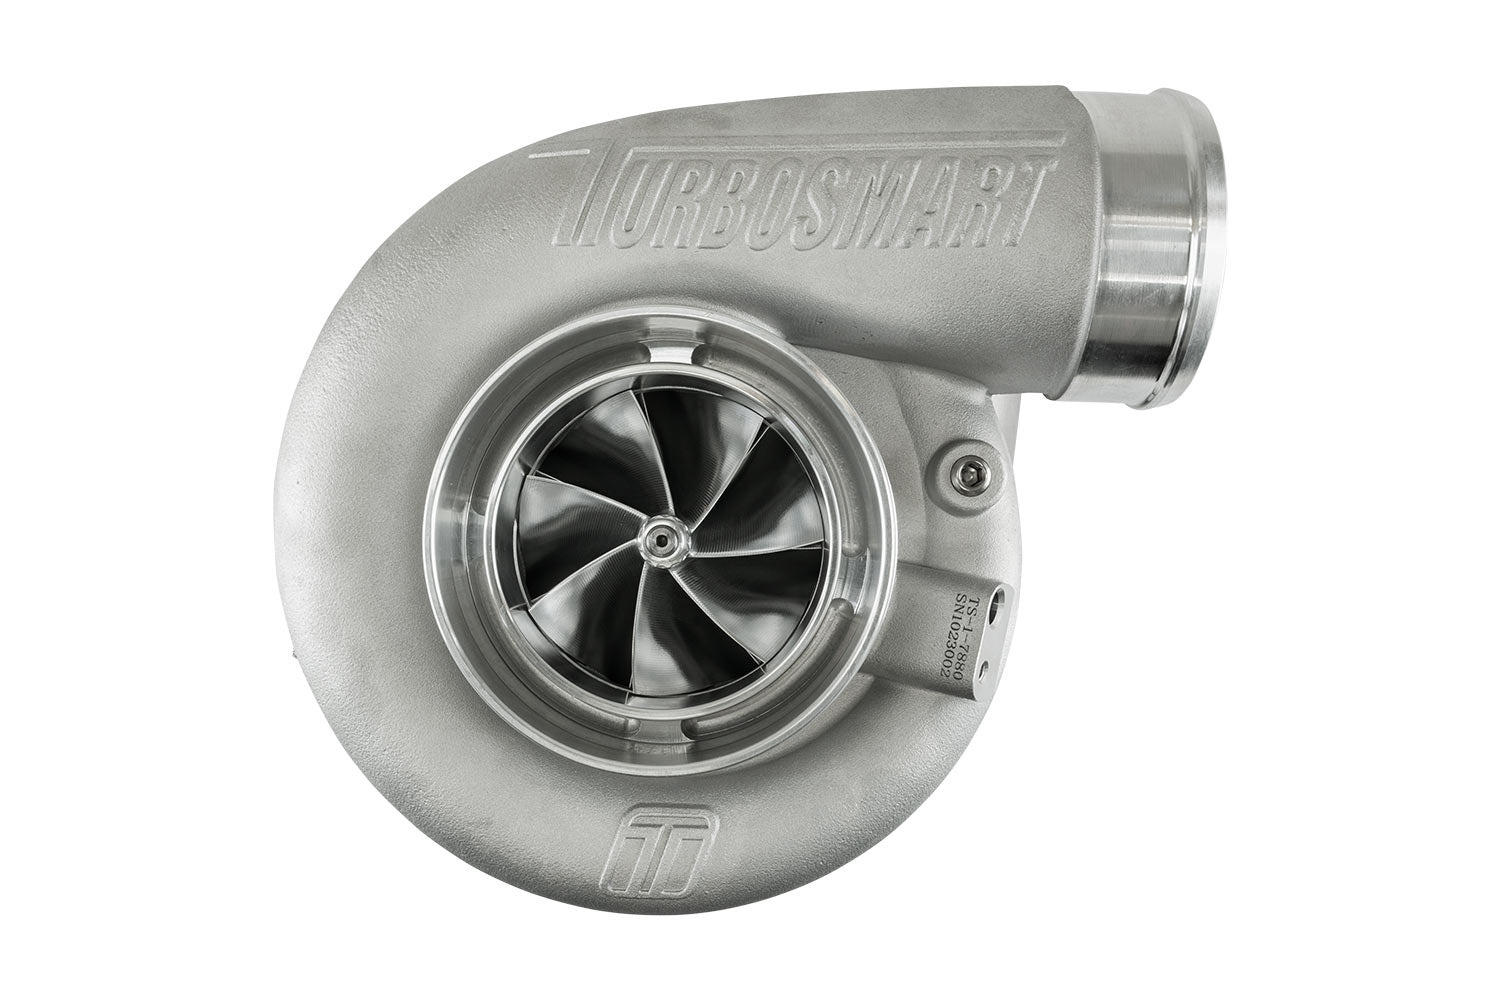 TS-2 Performance Turbocharger (Water Cooled) 7170 V-Band 0.96AR Externally Wastegated - 0